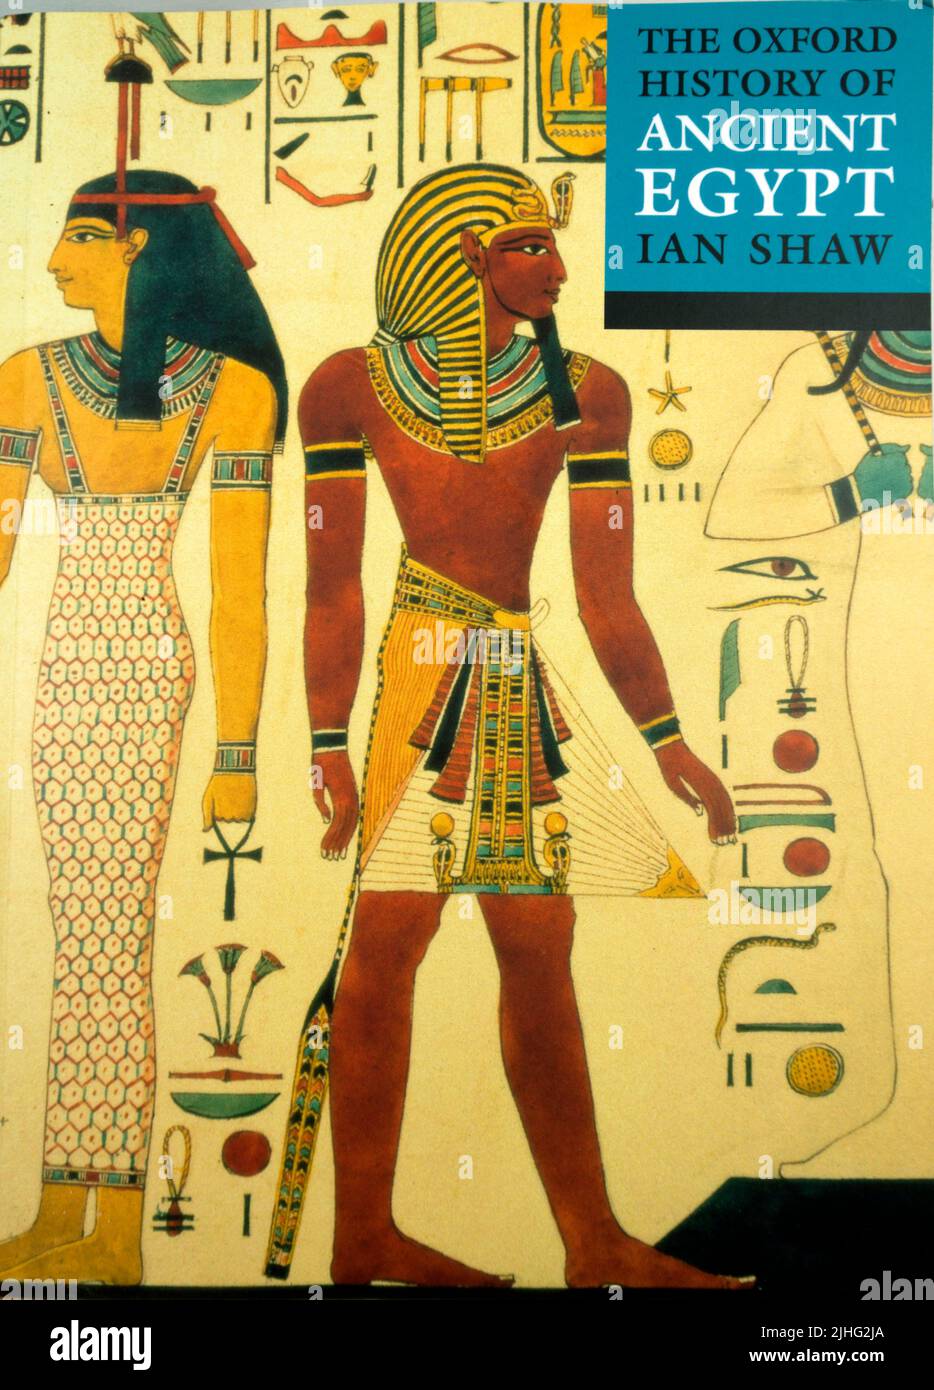 Oxford Ancient History of Egypt Buch. Stockfoto